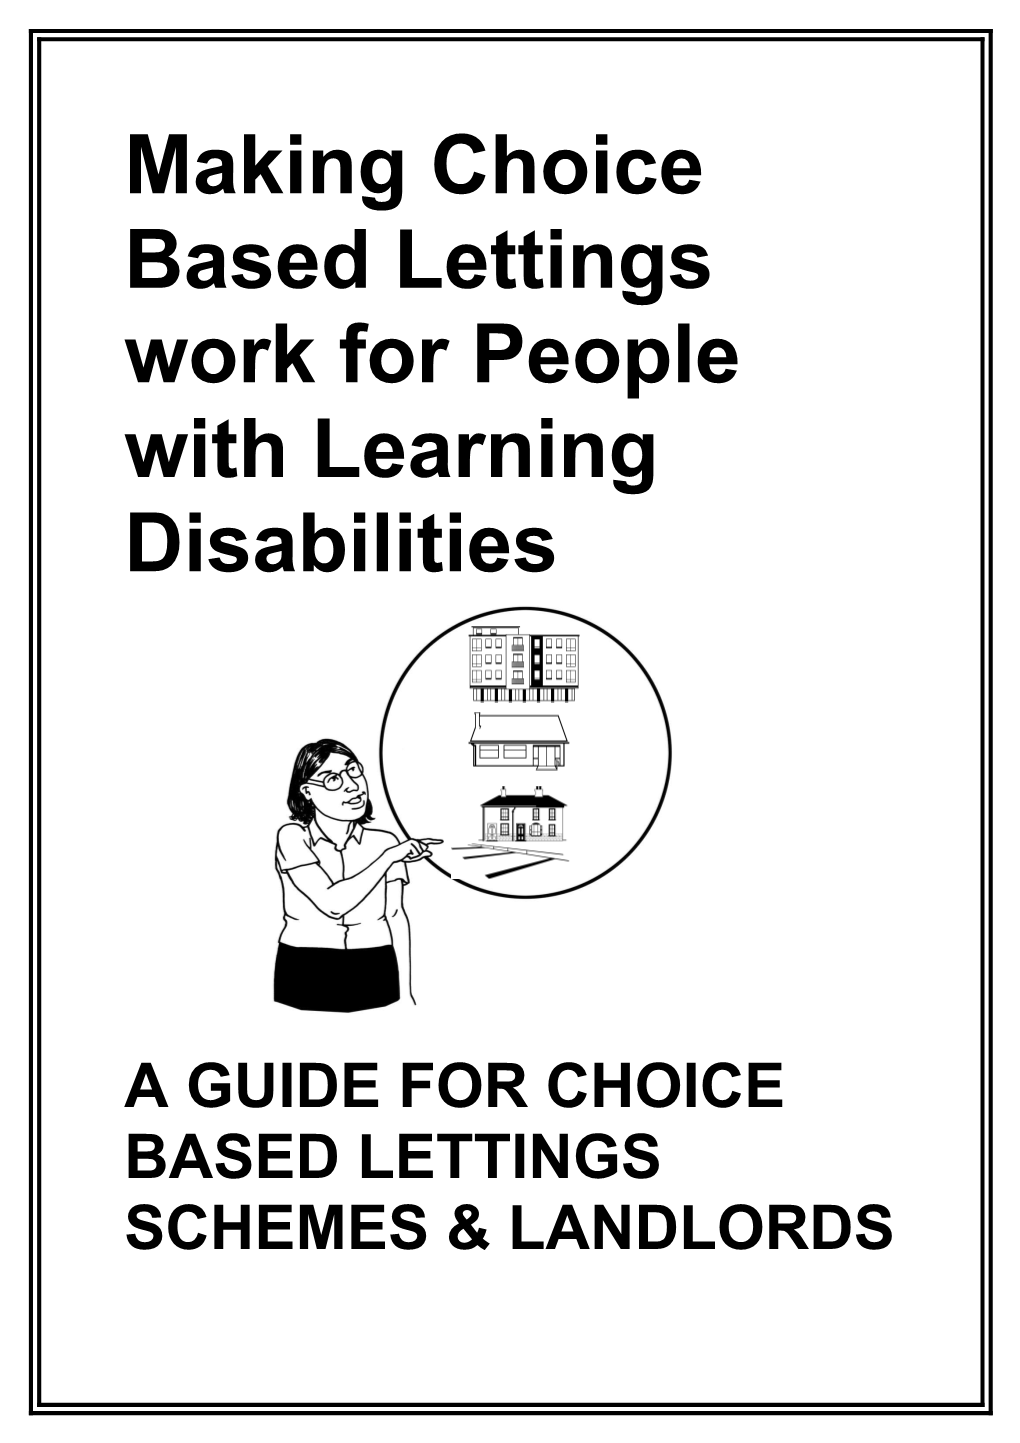 A Guide for Choice Based Lettings Schemes & Landlords